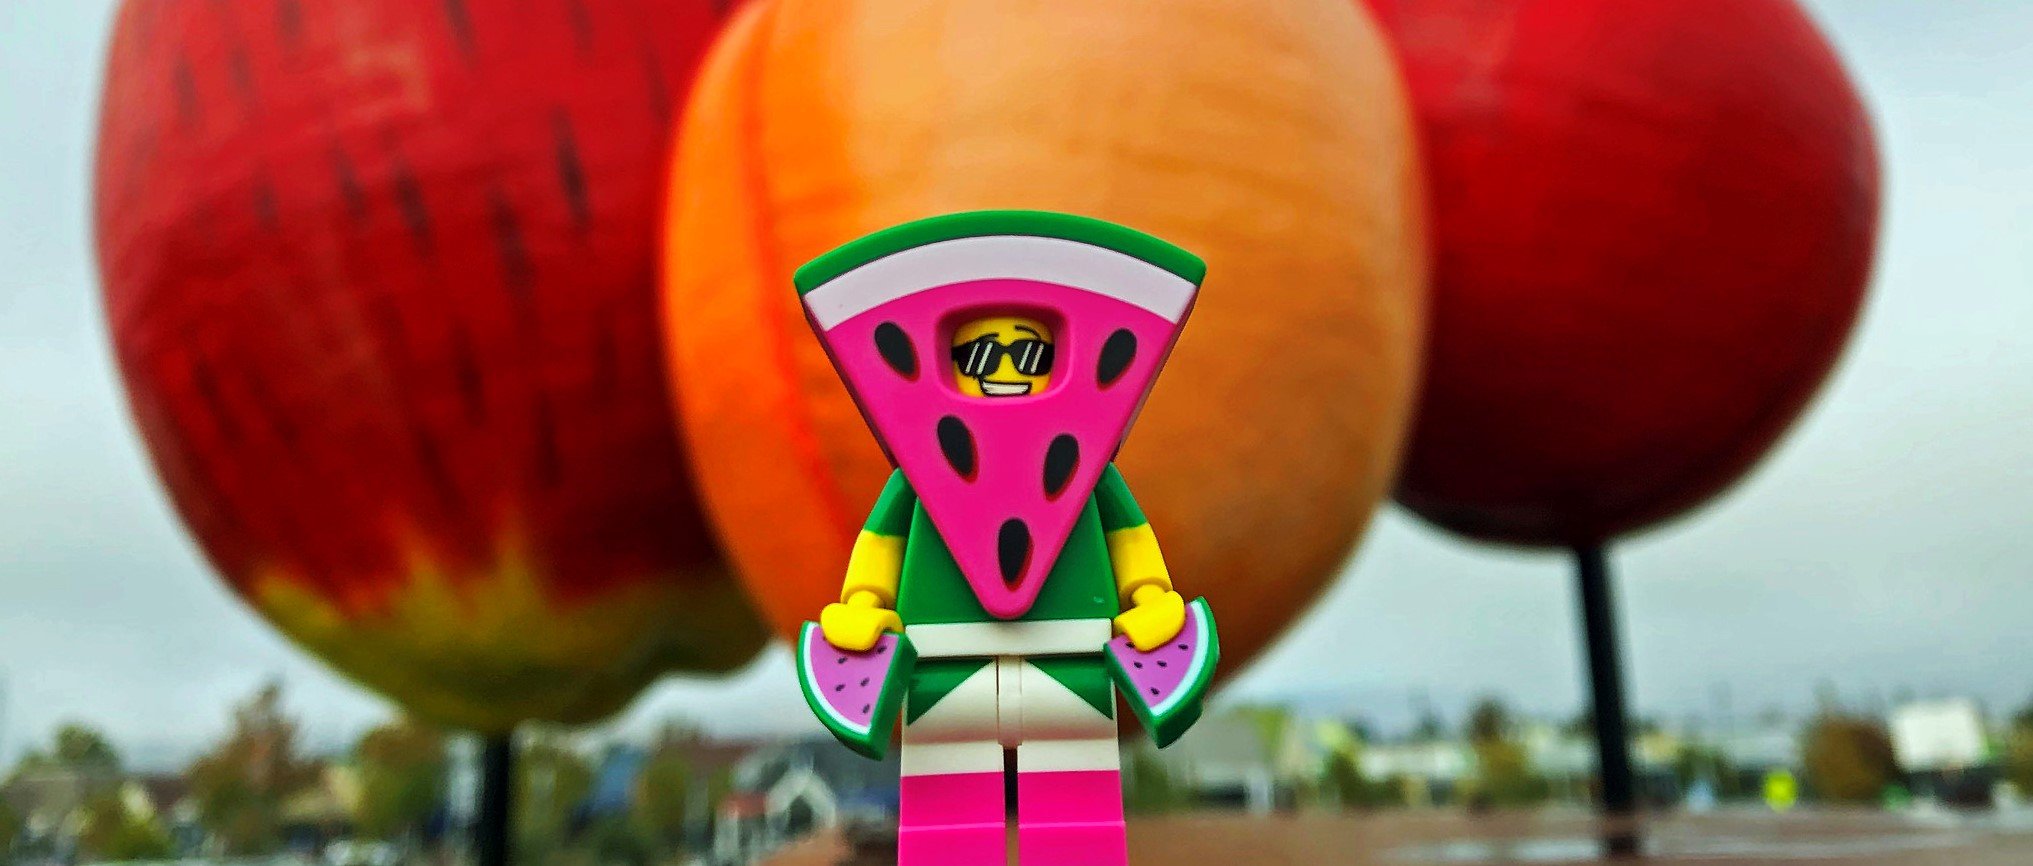 This LEGO eats watermelon on the regular. Is that good for weight loss?